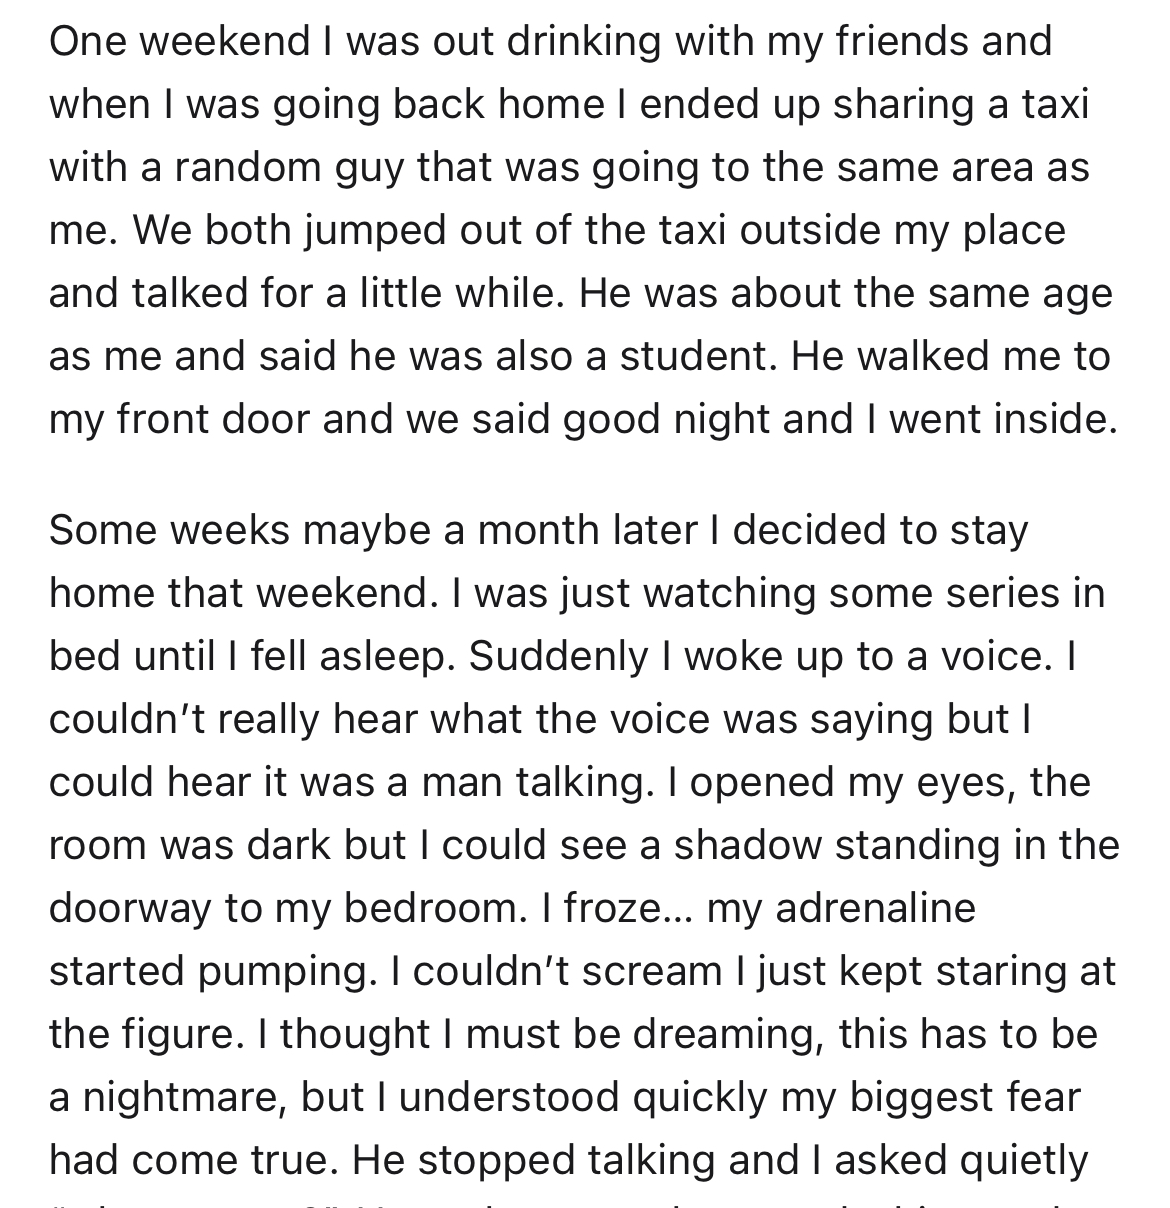 man enters woman's unlocked apartment -angle - One weekend I was out drinking with my friends and when I was going back home I ended up sharing a taxi with a random guy that was going to the same area as me. We both jumped out of the taxi outside my place